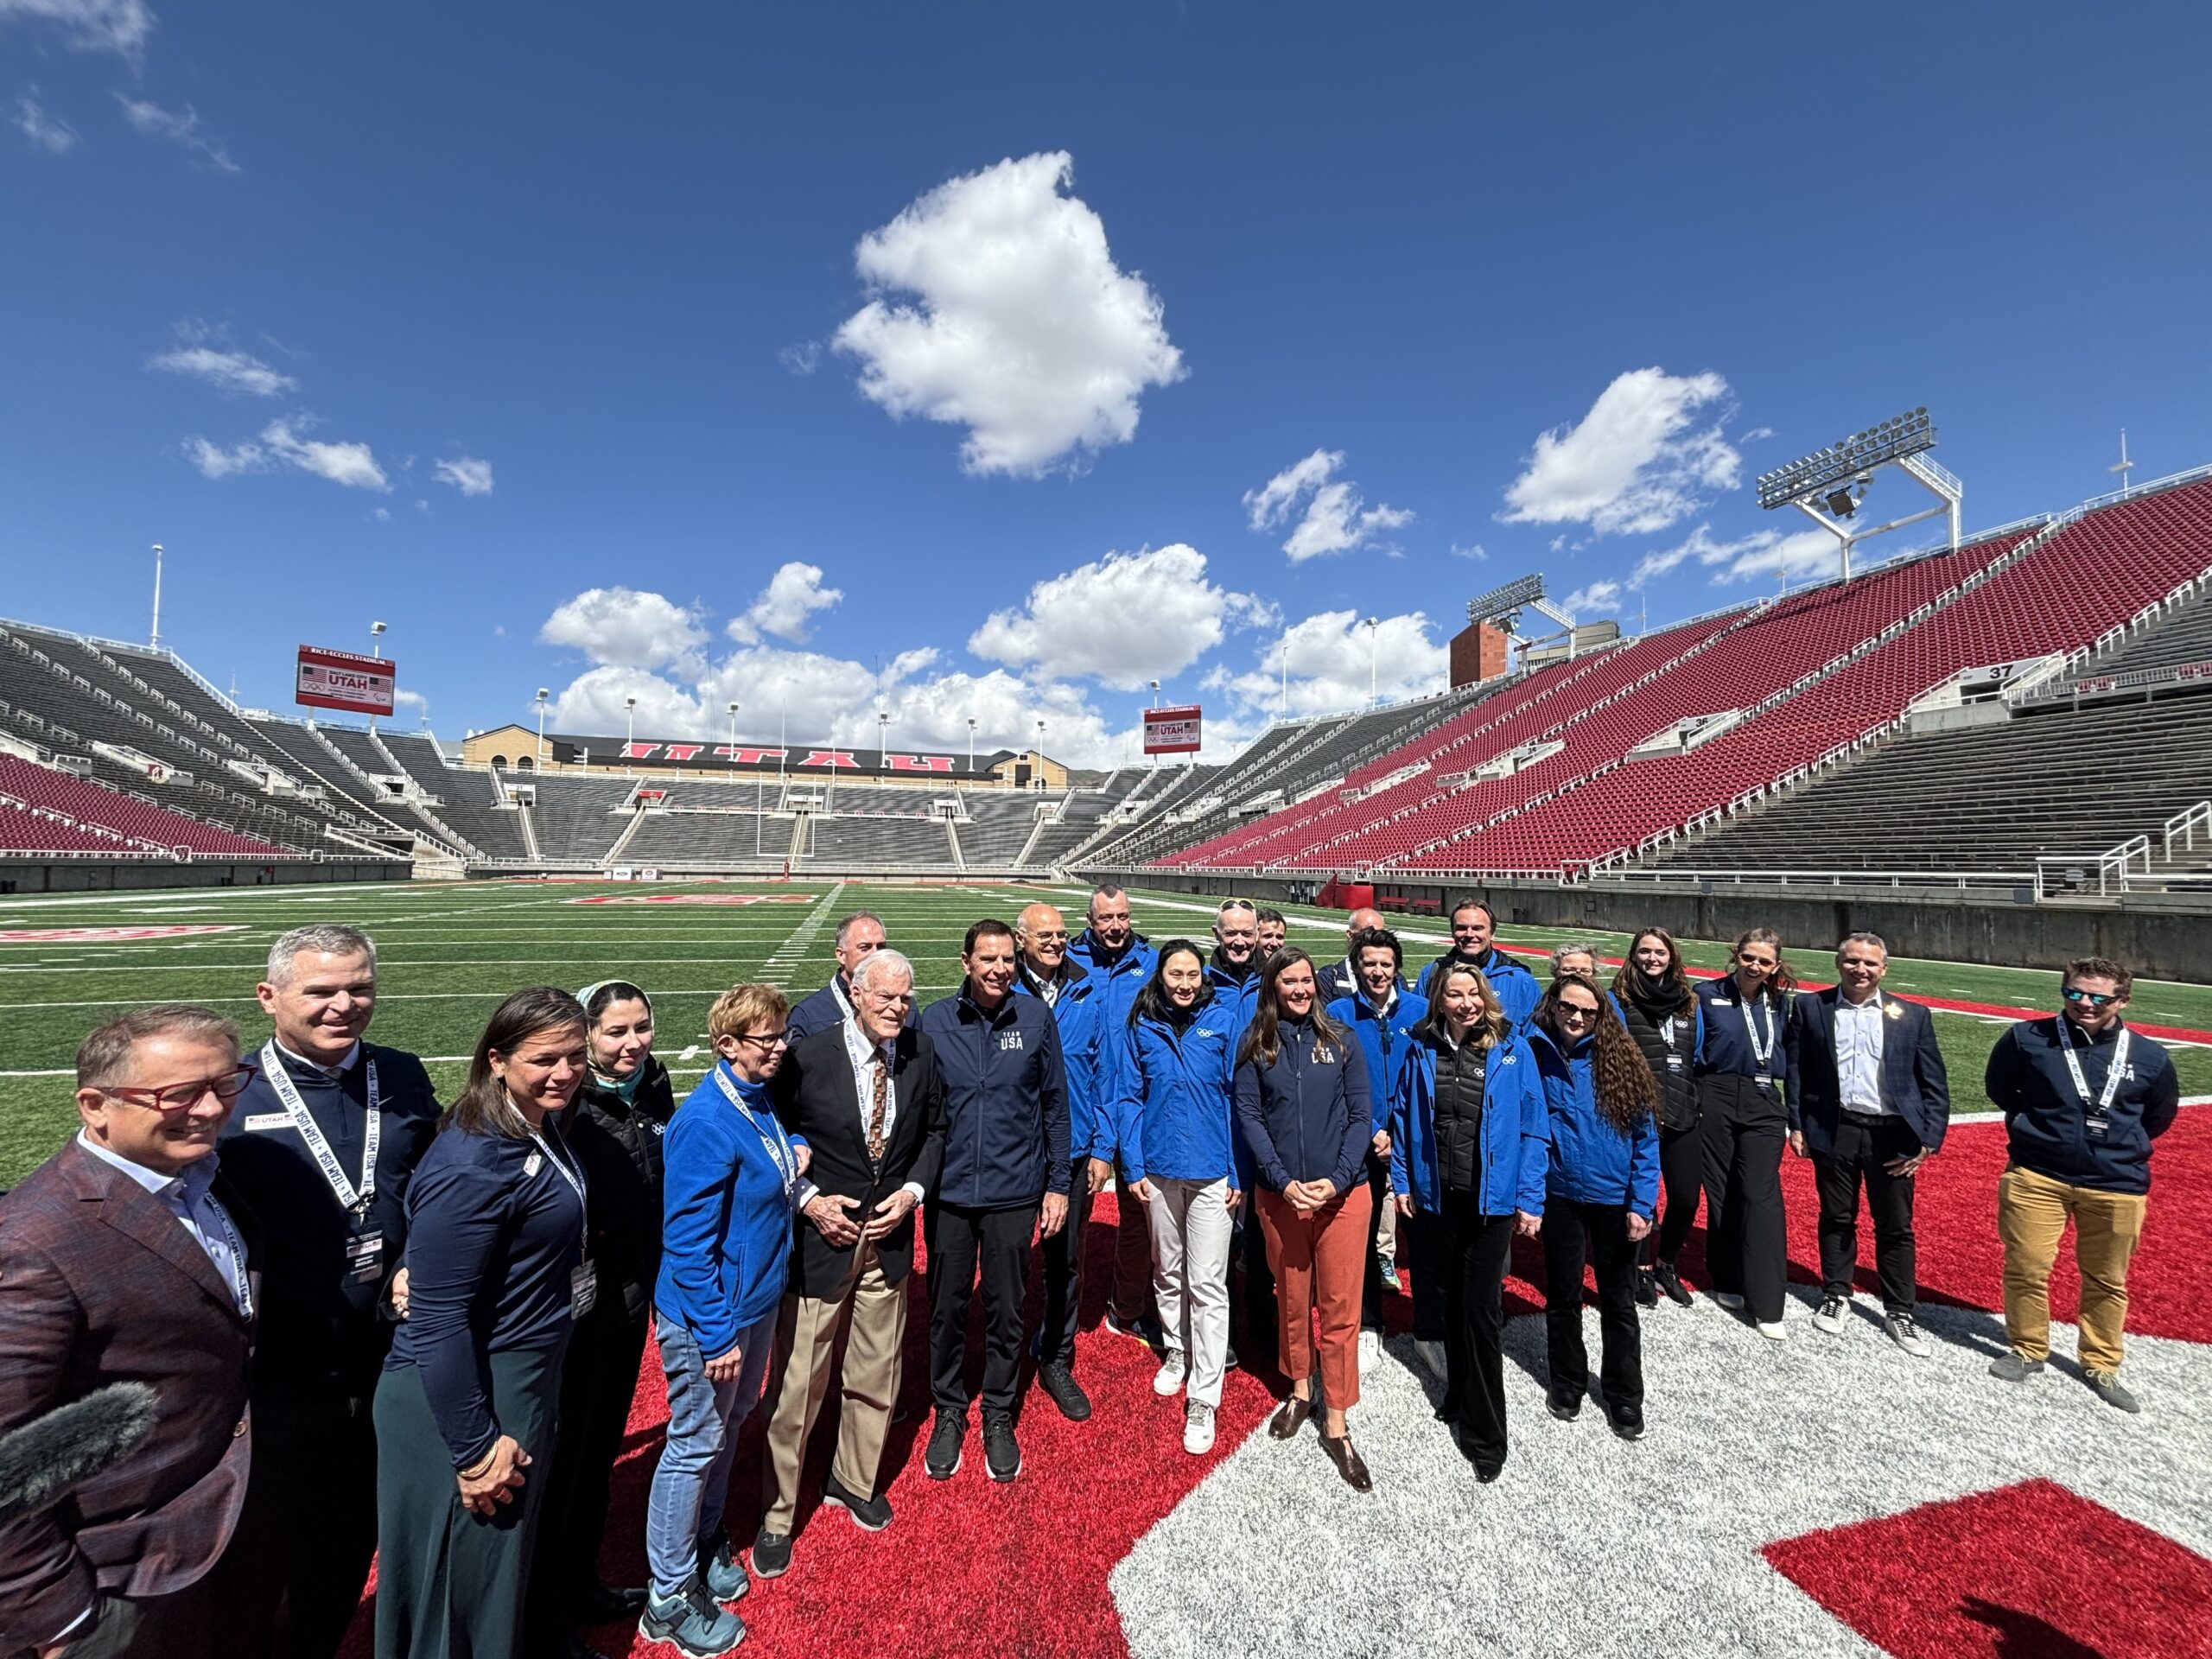 Members of the IOC's Future Host Commission and Salt Lake City-Utah Committee for the pose at Rice-Eccles Stadium, proposed host for the Opening and Closing Ceremonies at the 2034 Olympic and Paralympic Winter Games. Photo by Matt Traub/SportsTravel